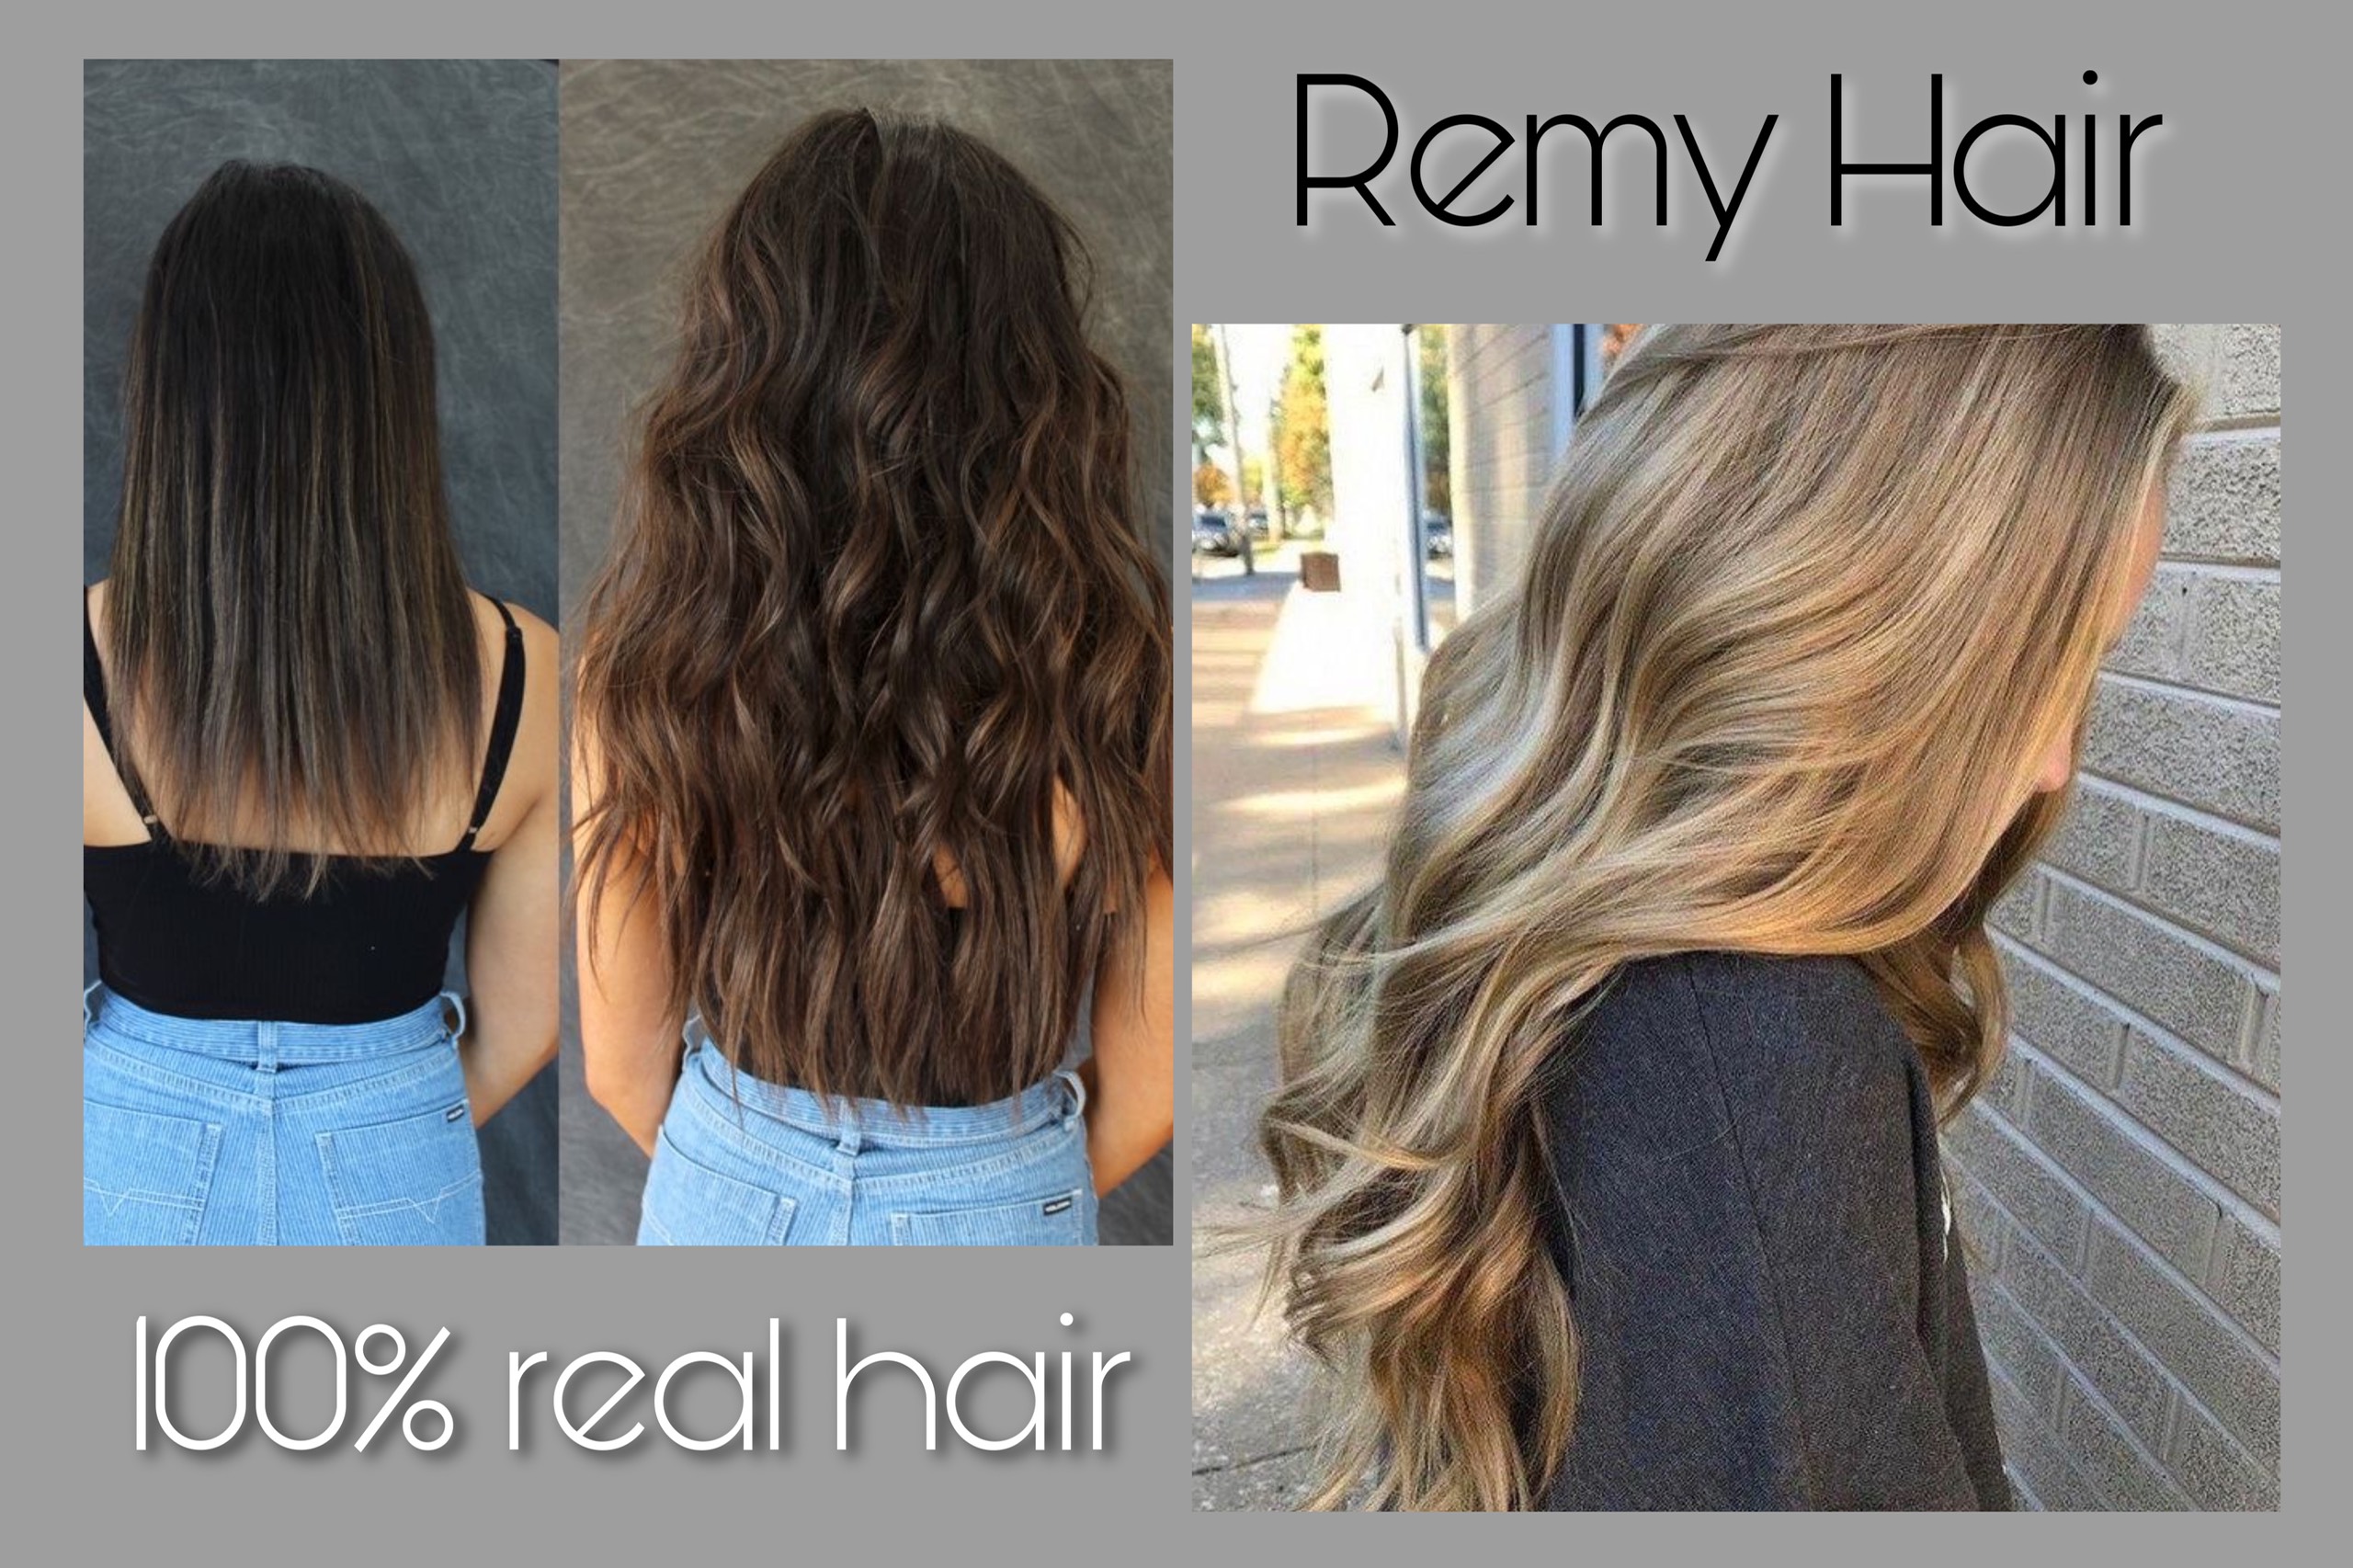 remy-hair-extension-finding-high-quality-remy-hair-extension-suppliers-1